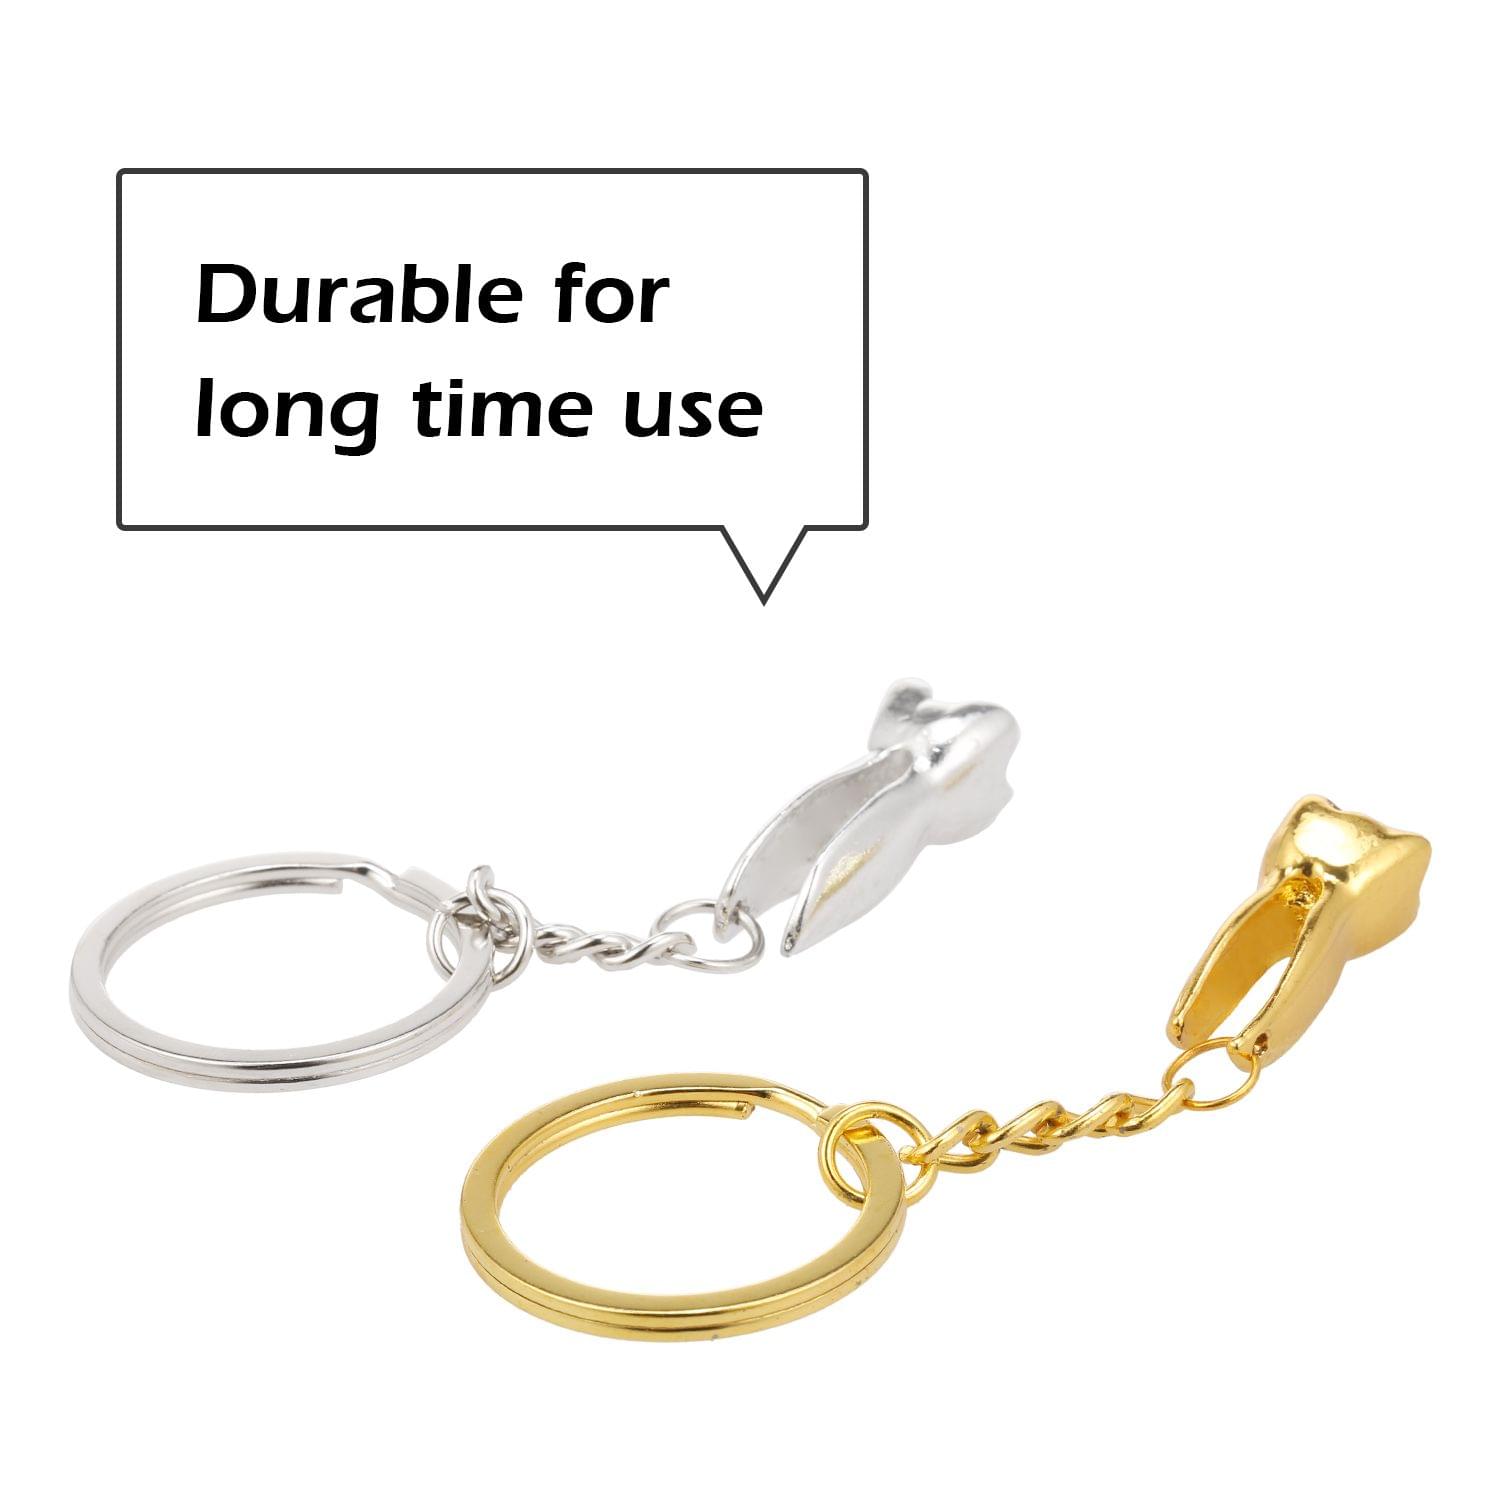 Gold Tooth-shaped Key Chain Dental Theme Stainless Steel Key